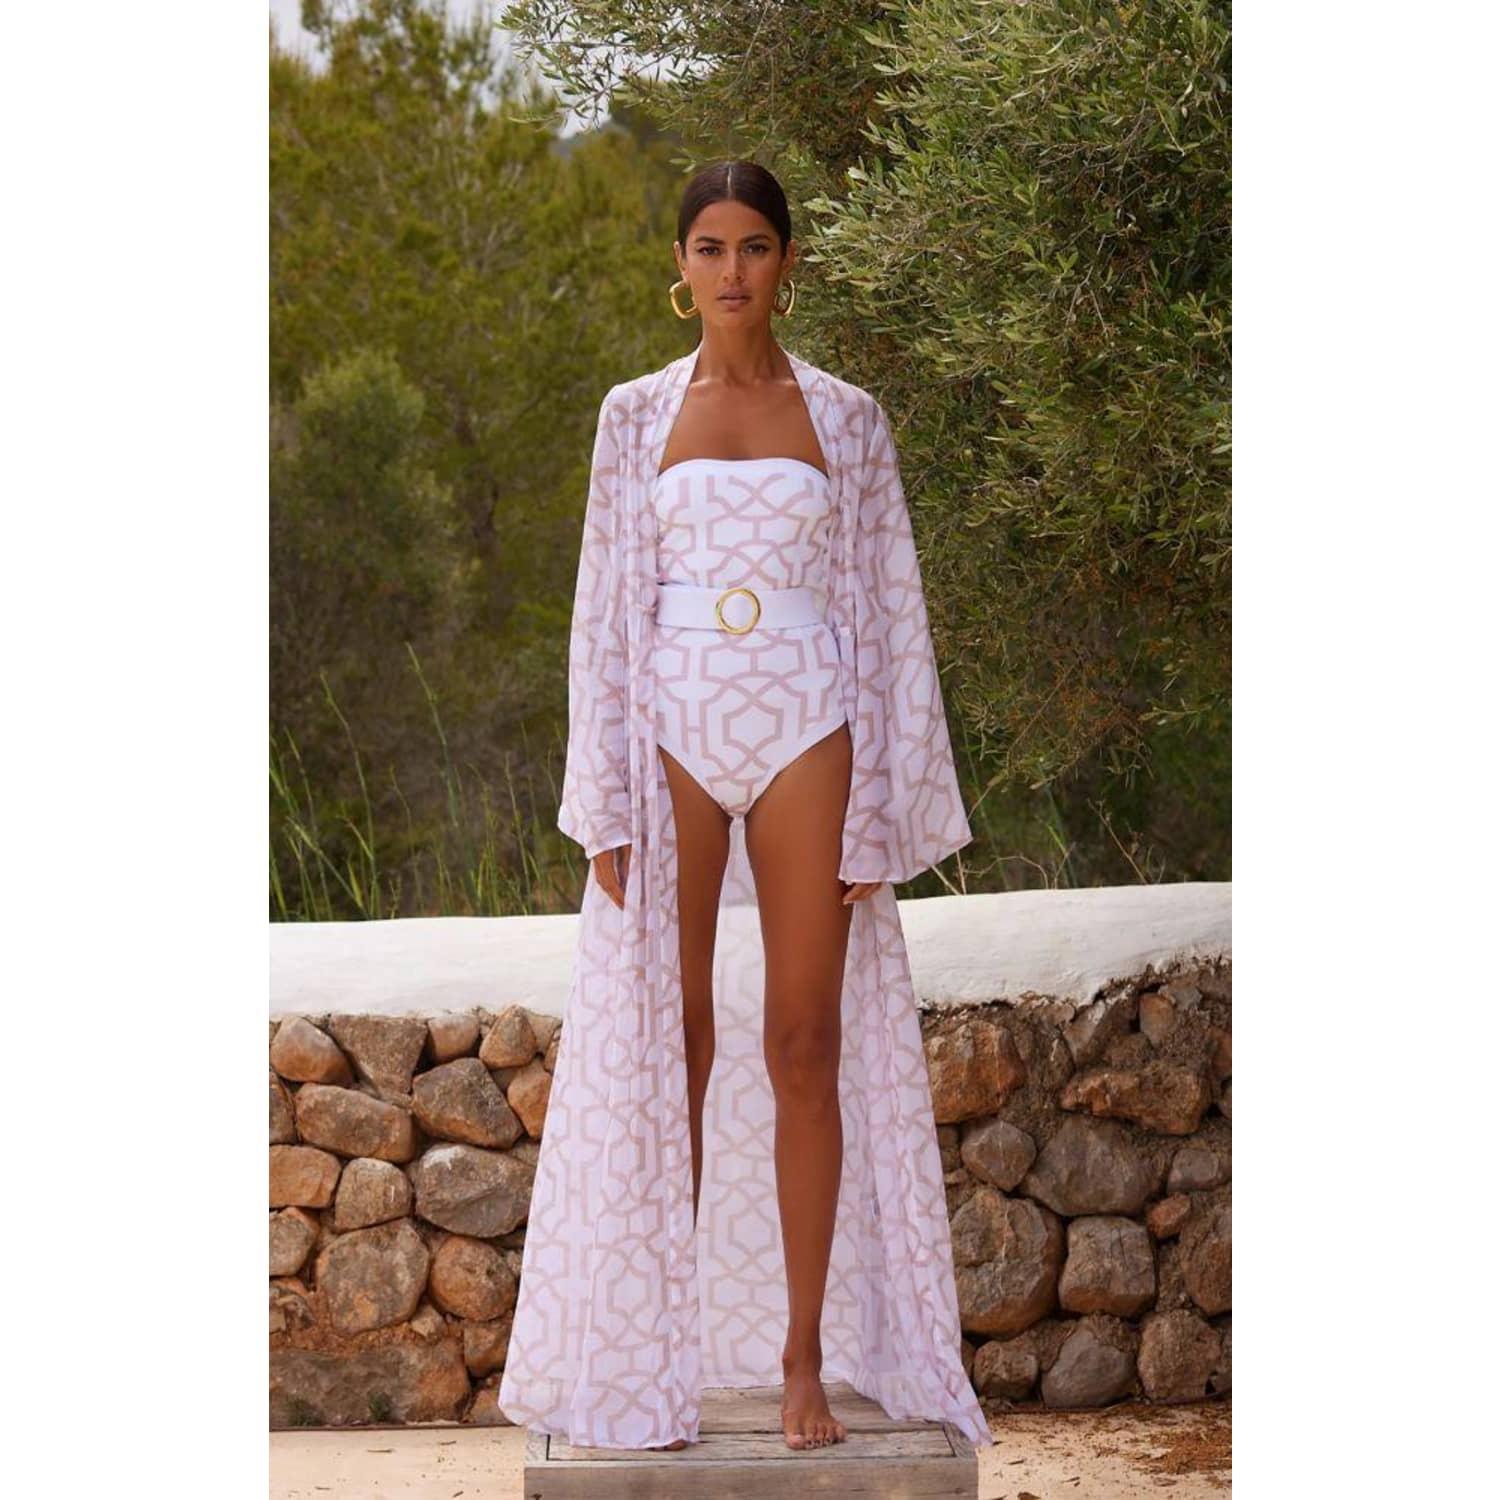 Alexandra Miro Exclusive to Betty printed beach cover-up